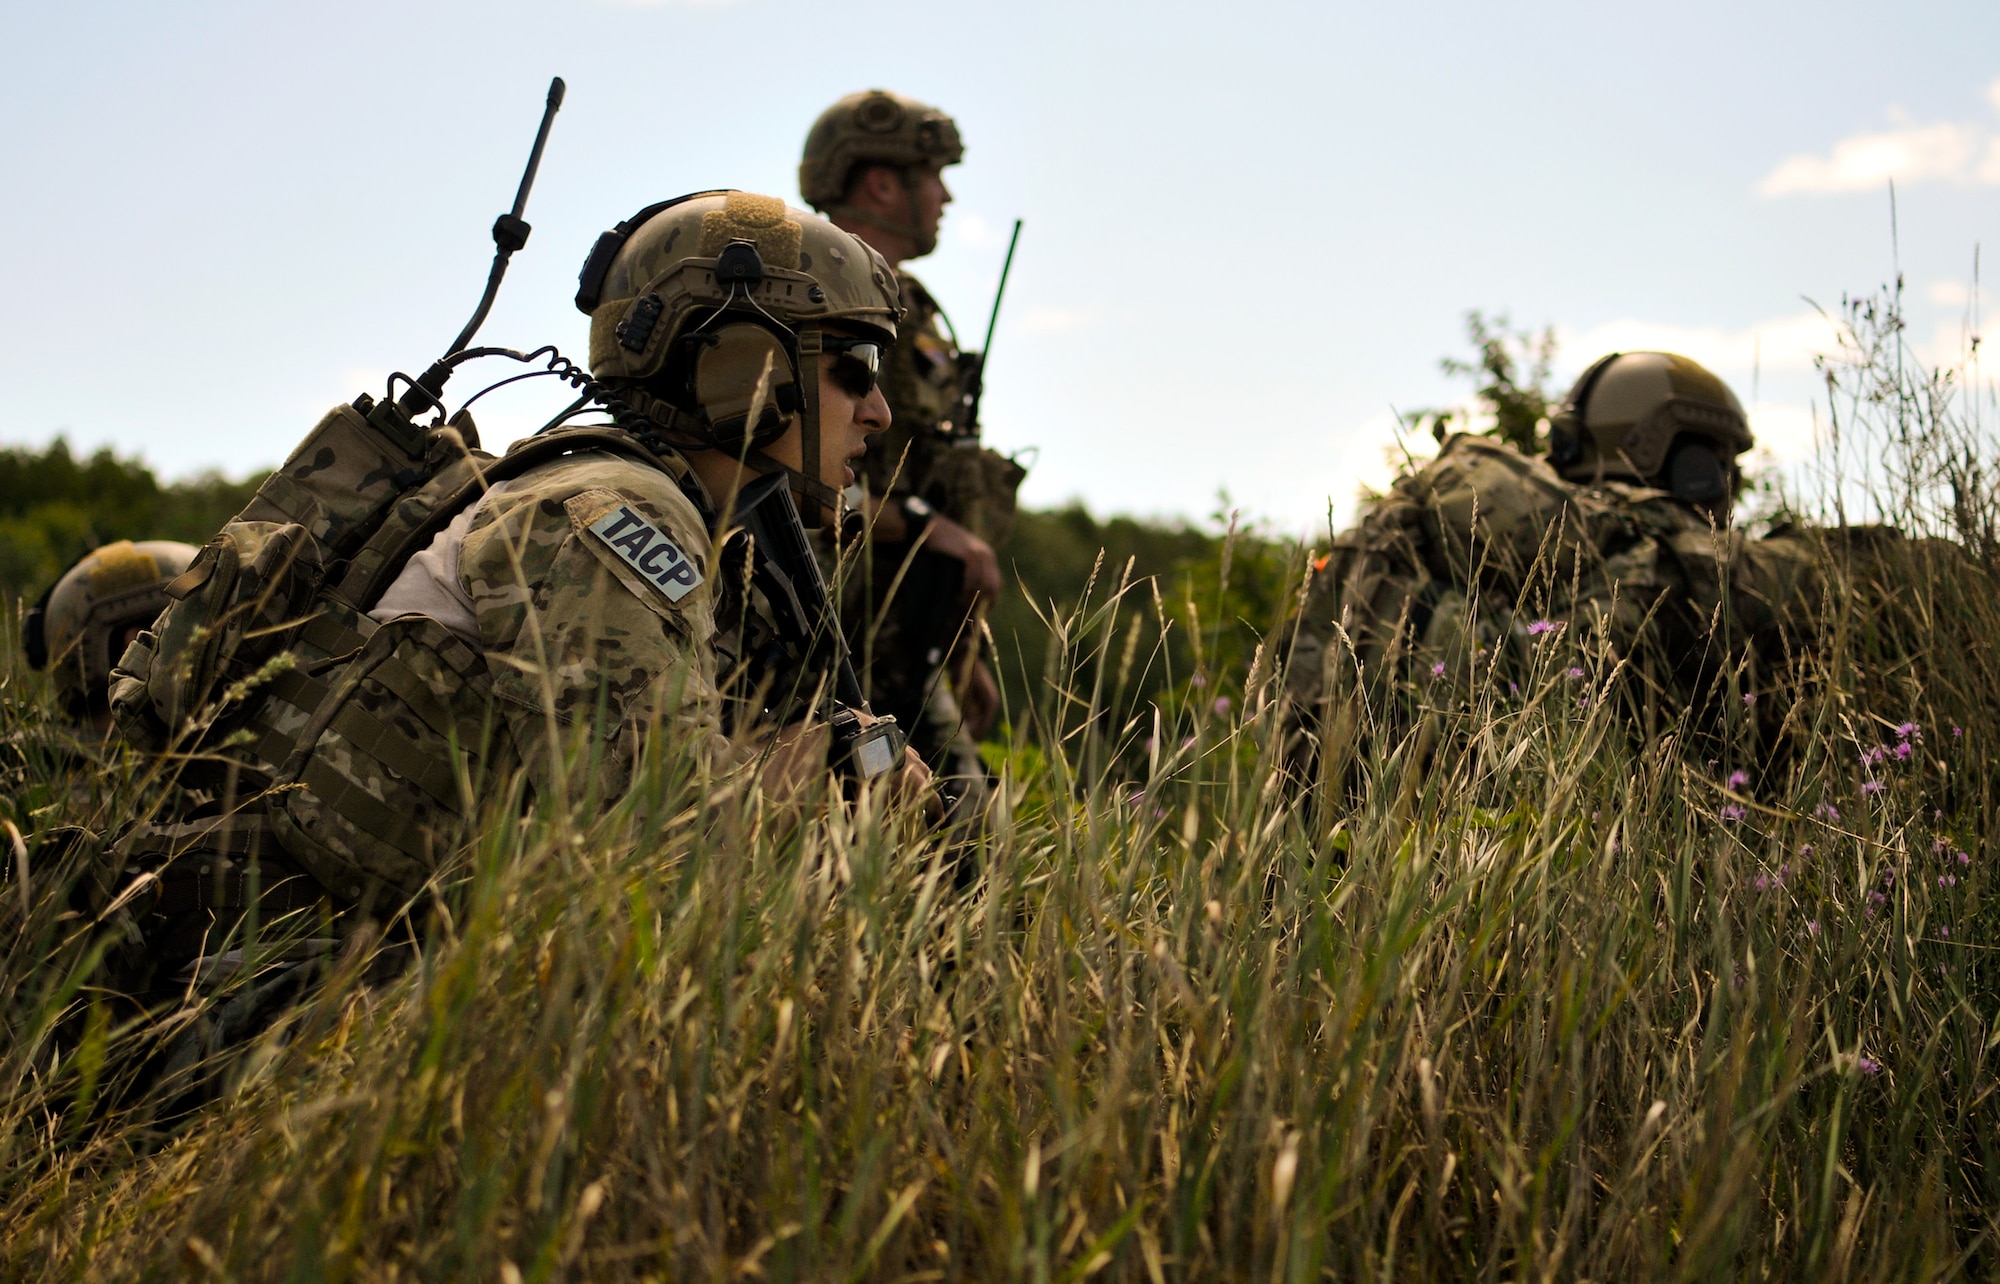 Tactical air control party specialists with the 169th Air Support Operations Squadron survey an enemy-controlled landing zone before calling in close-air support at Operation Northern Strike in Grayling Air Gunnery Range, Grayling, Mich., Aug. 14, 2014. Northern Strike was a 3-week-long exercise led by the National Guard that demonstrated the combined power of joint and multinational air and ground forces. TACPs with the Air National Guard’s 169th ASOS from Peoria, Ill., and more than 5,000 other armed forces members from 12 states and two coalition nations participated in the combat training. (U.S. Air National Guard photo by Staff Sgt. Lealan Buehrer/Released)